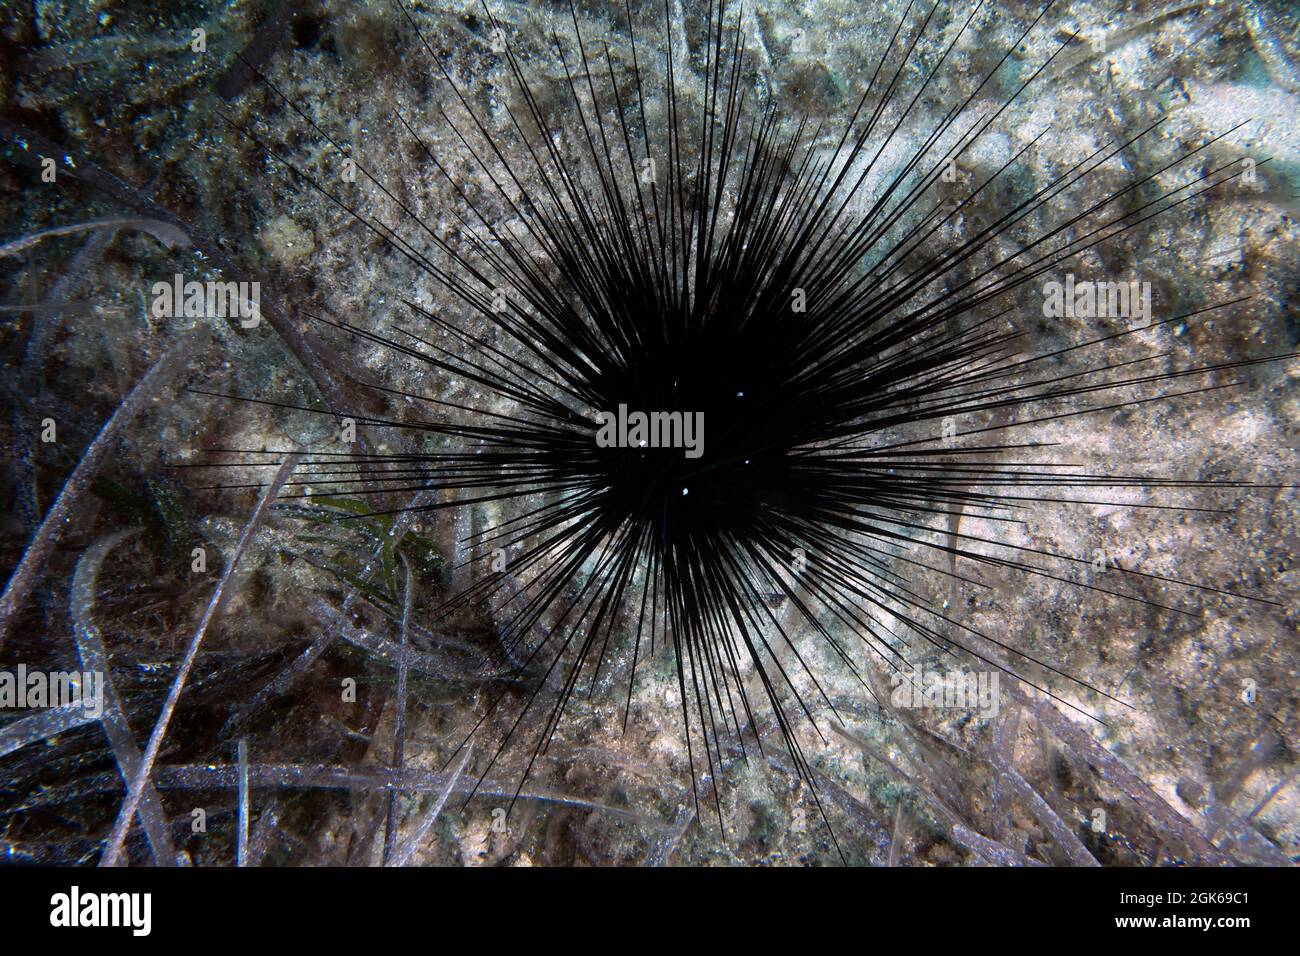 A Long Spined Sea Urchin (Centrostephanus longispinus) in the Mediterranean Sea Stock Photo